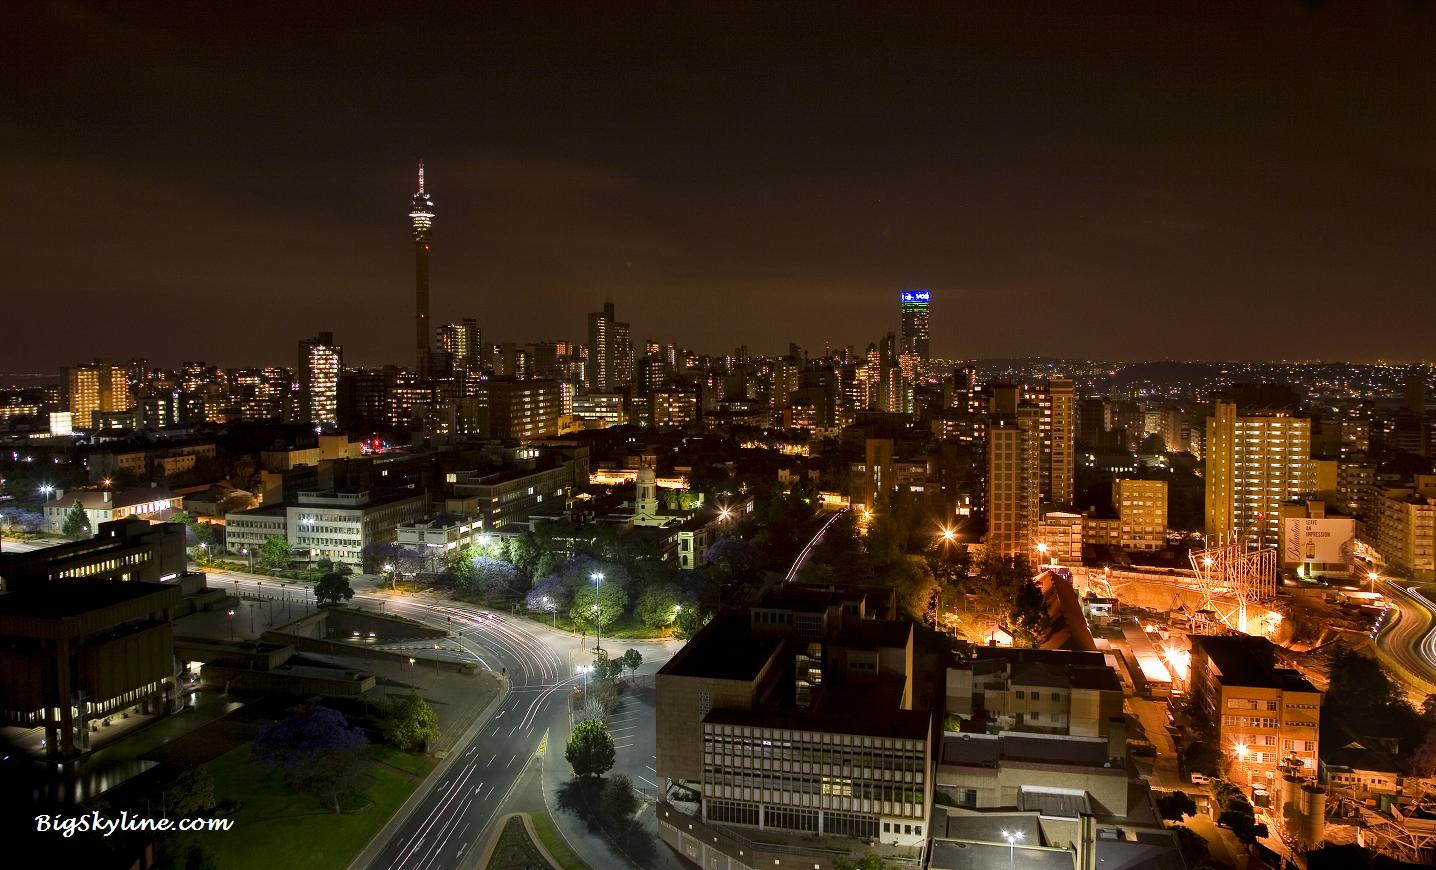 Night time skyline picture of Johannesburg